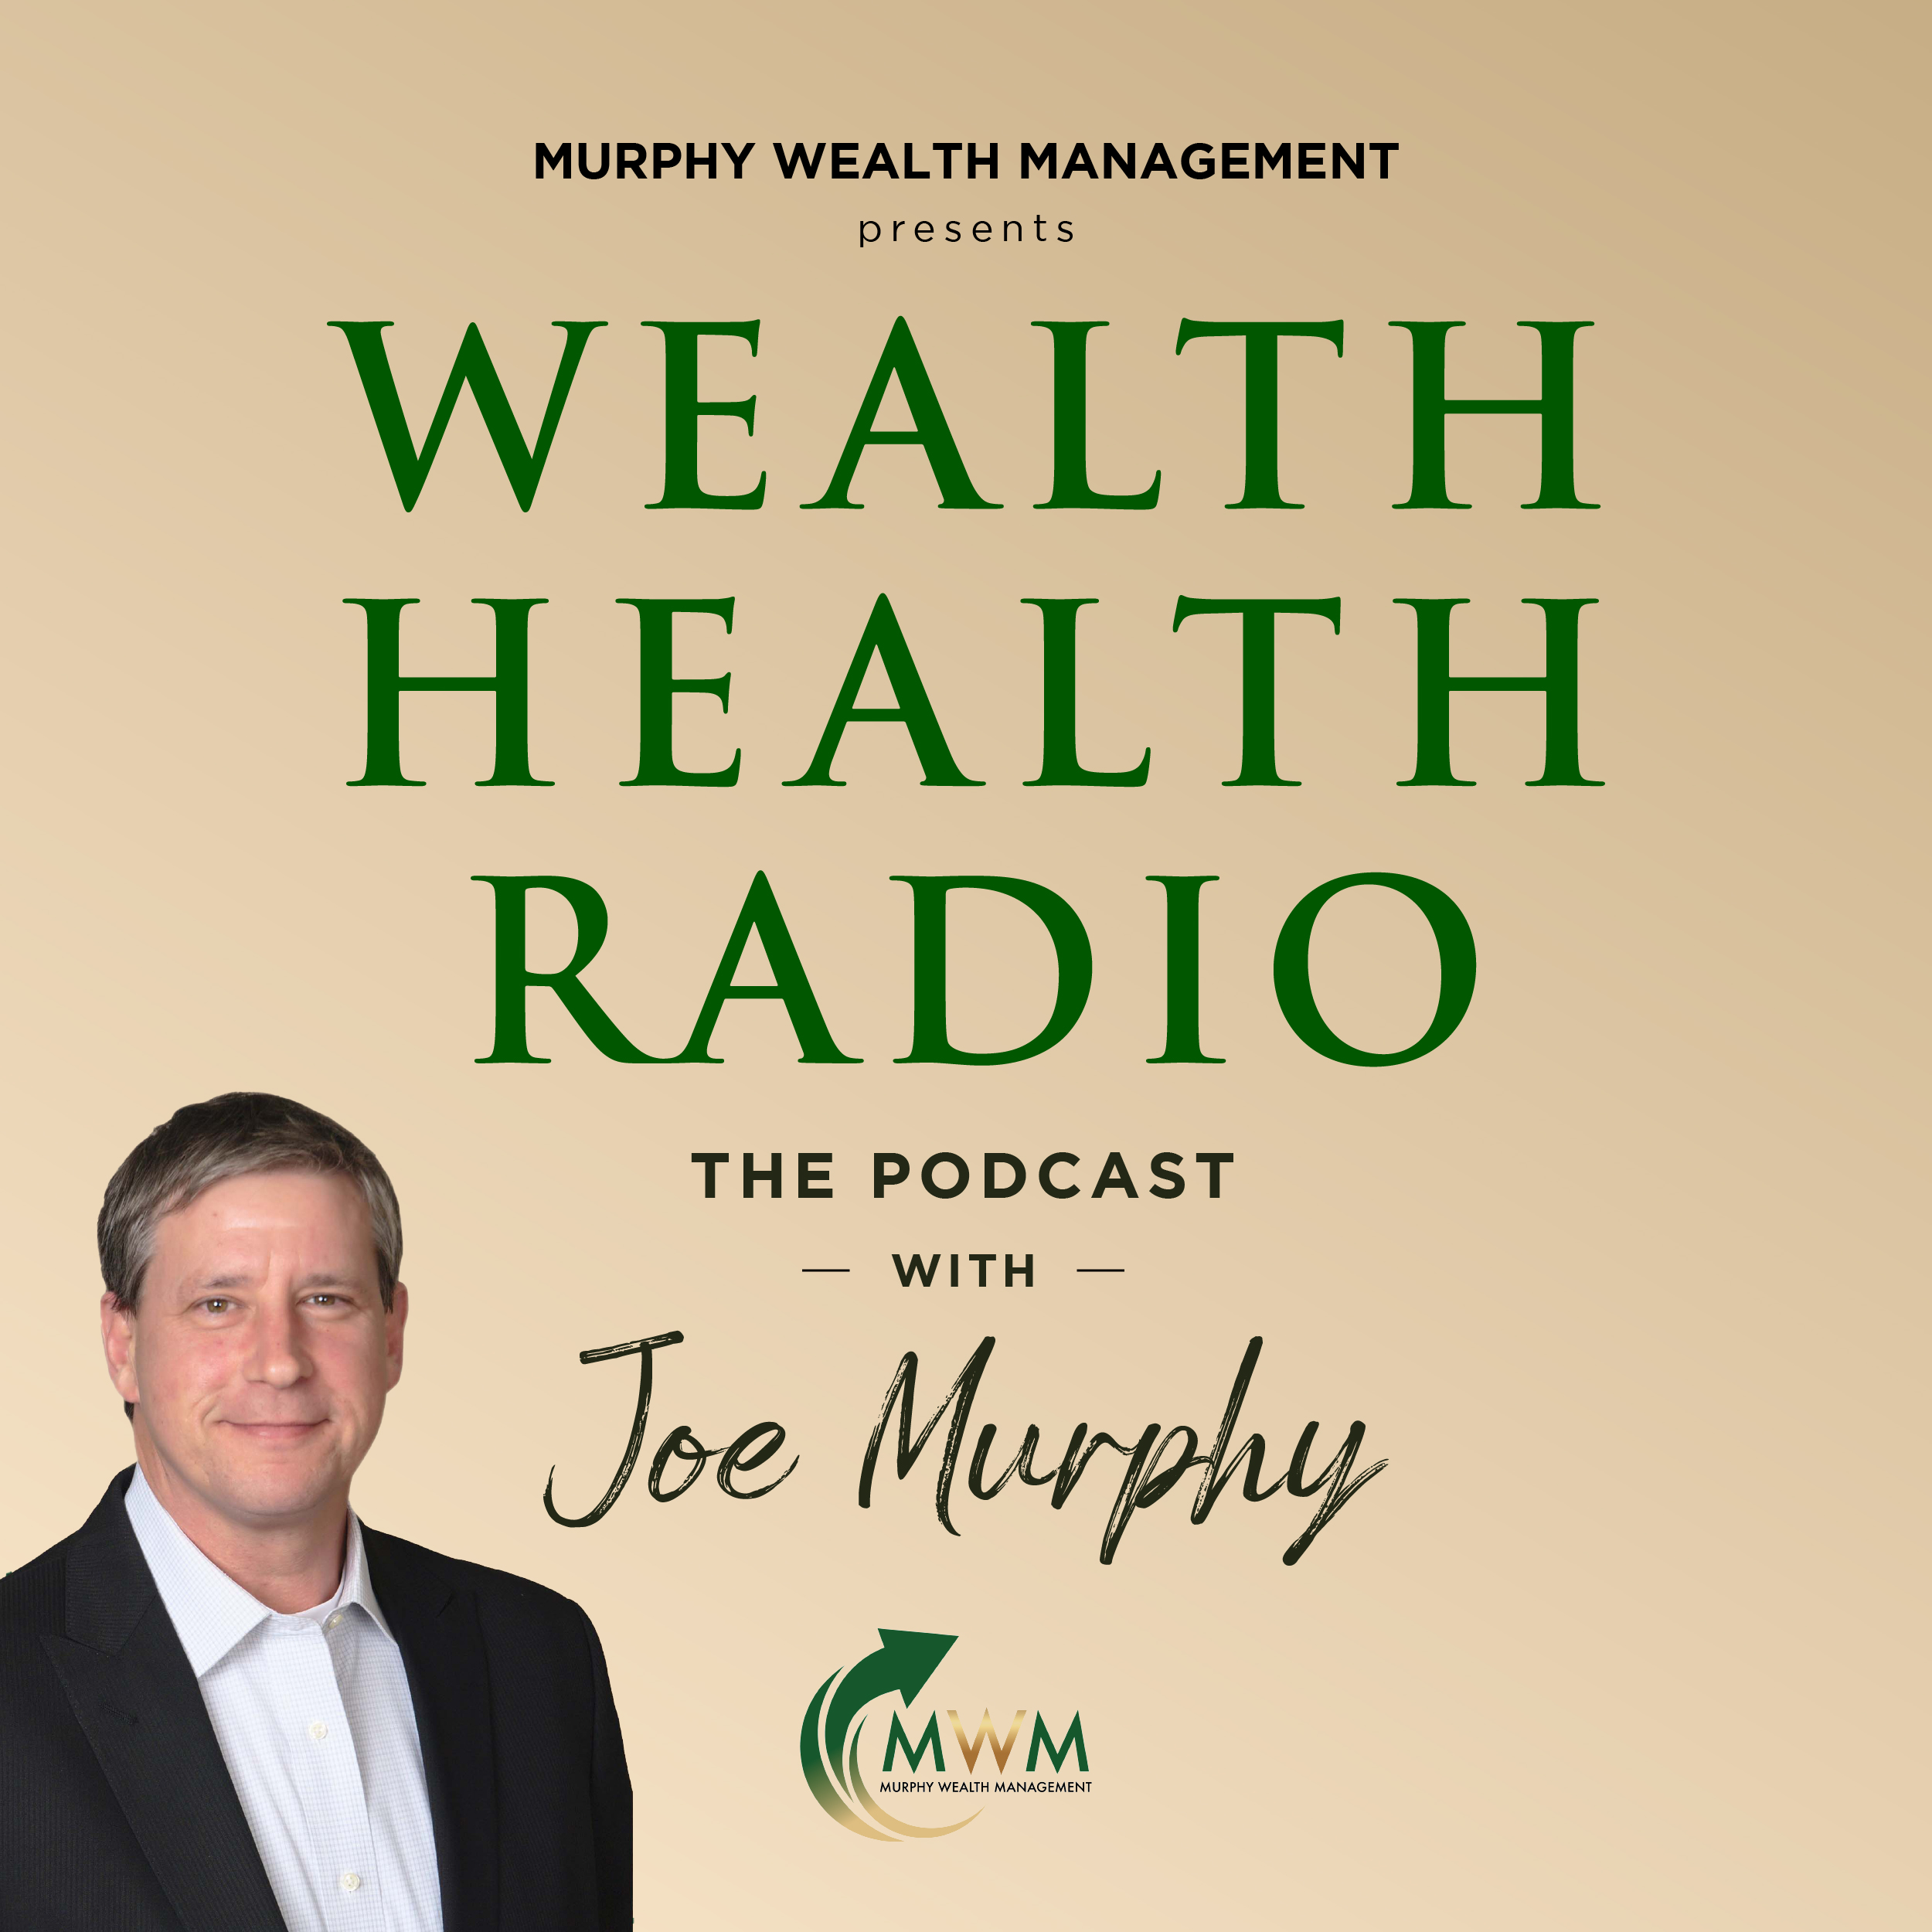 Wealth Health Radio's Joe Murphy explains how the SECURE Act 2.0 can impact your retirement plan